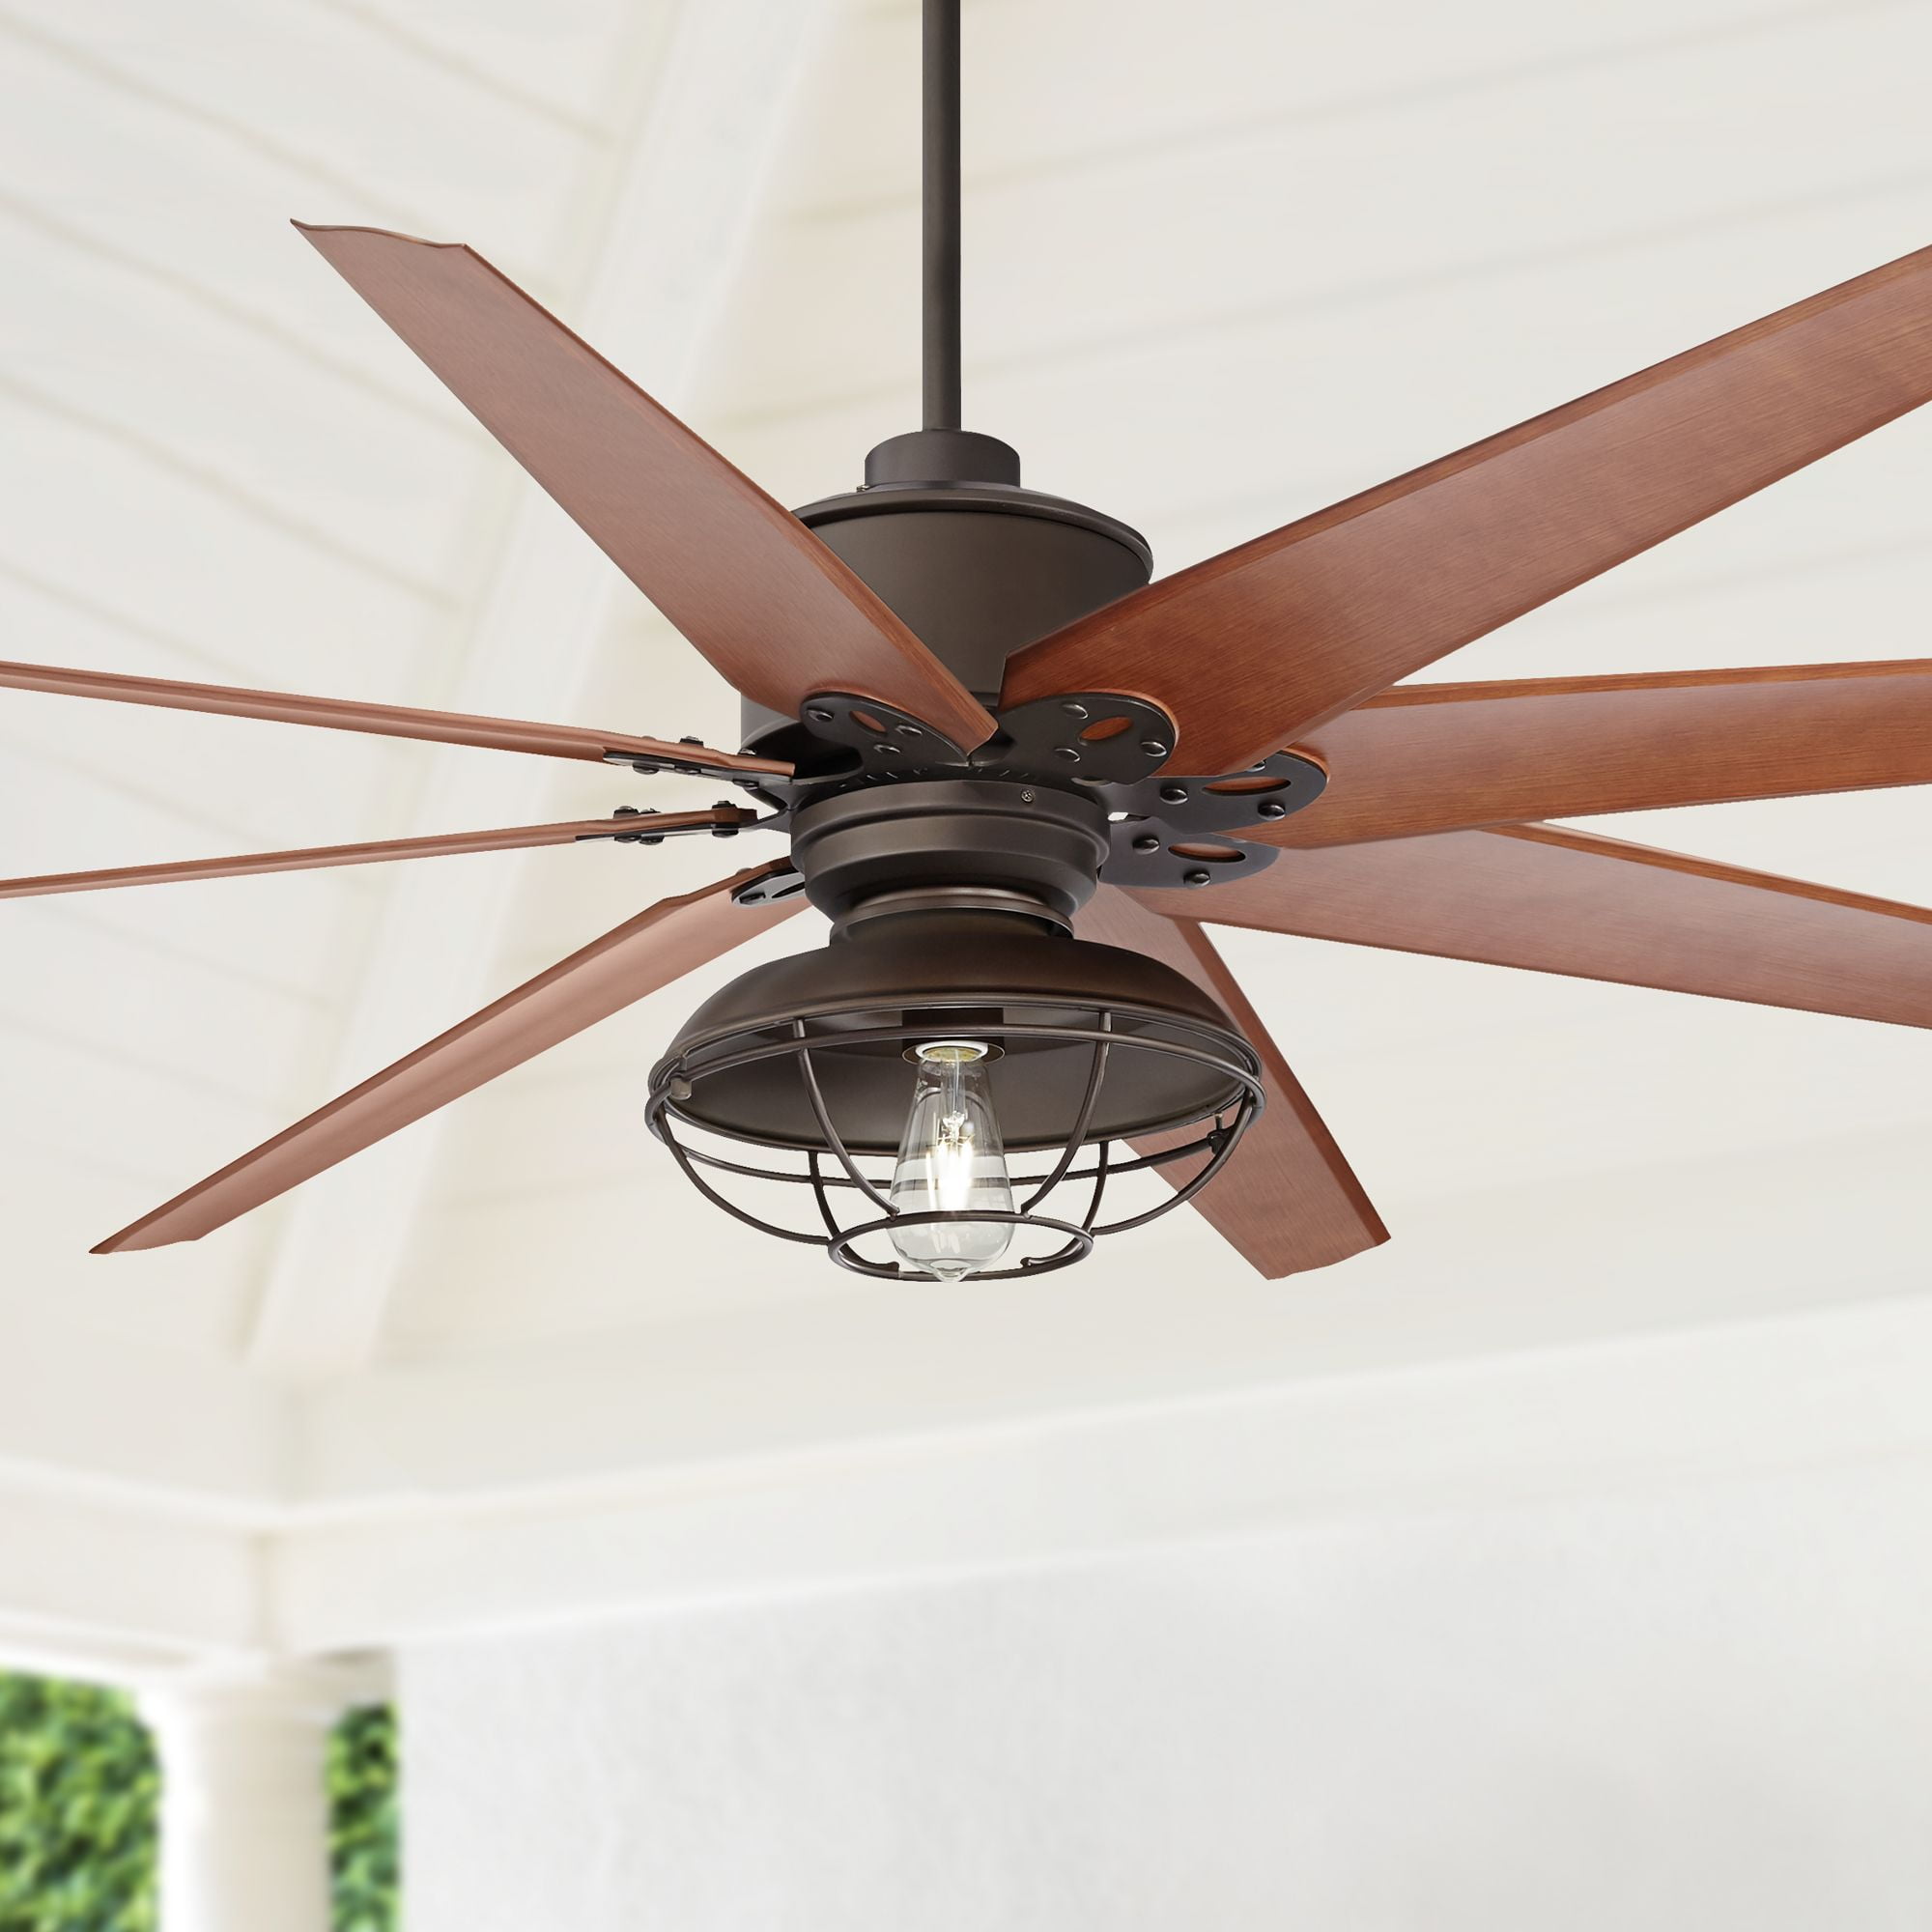 72" Casa Vieja Industrial Outdoor Ceiling Fan with Light ...